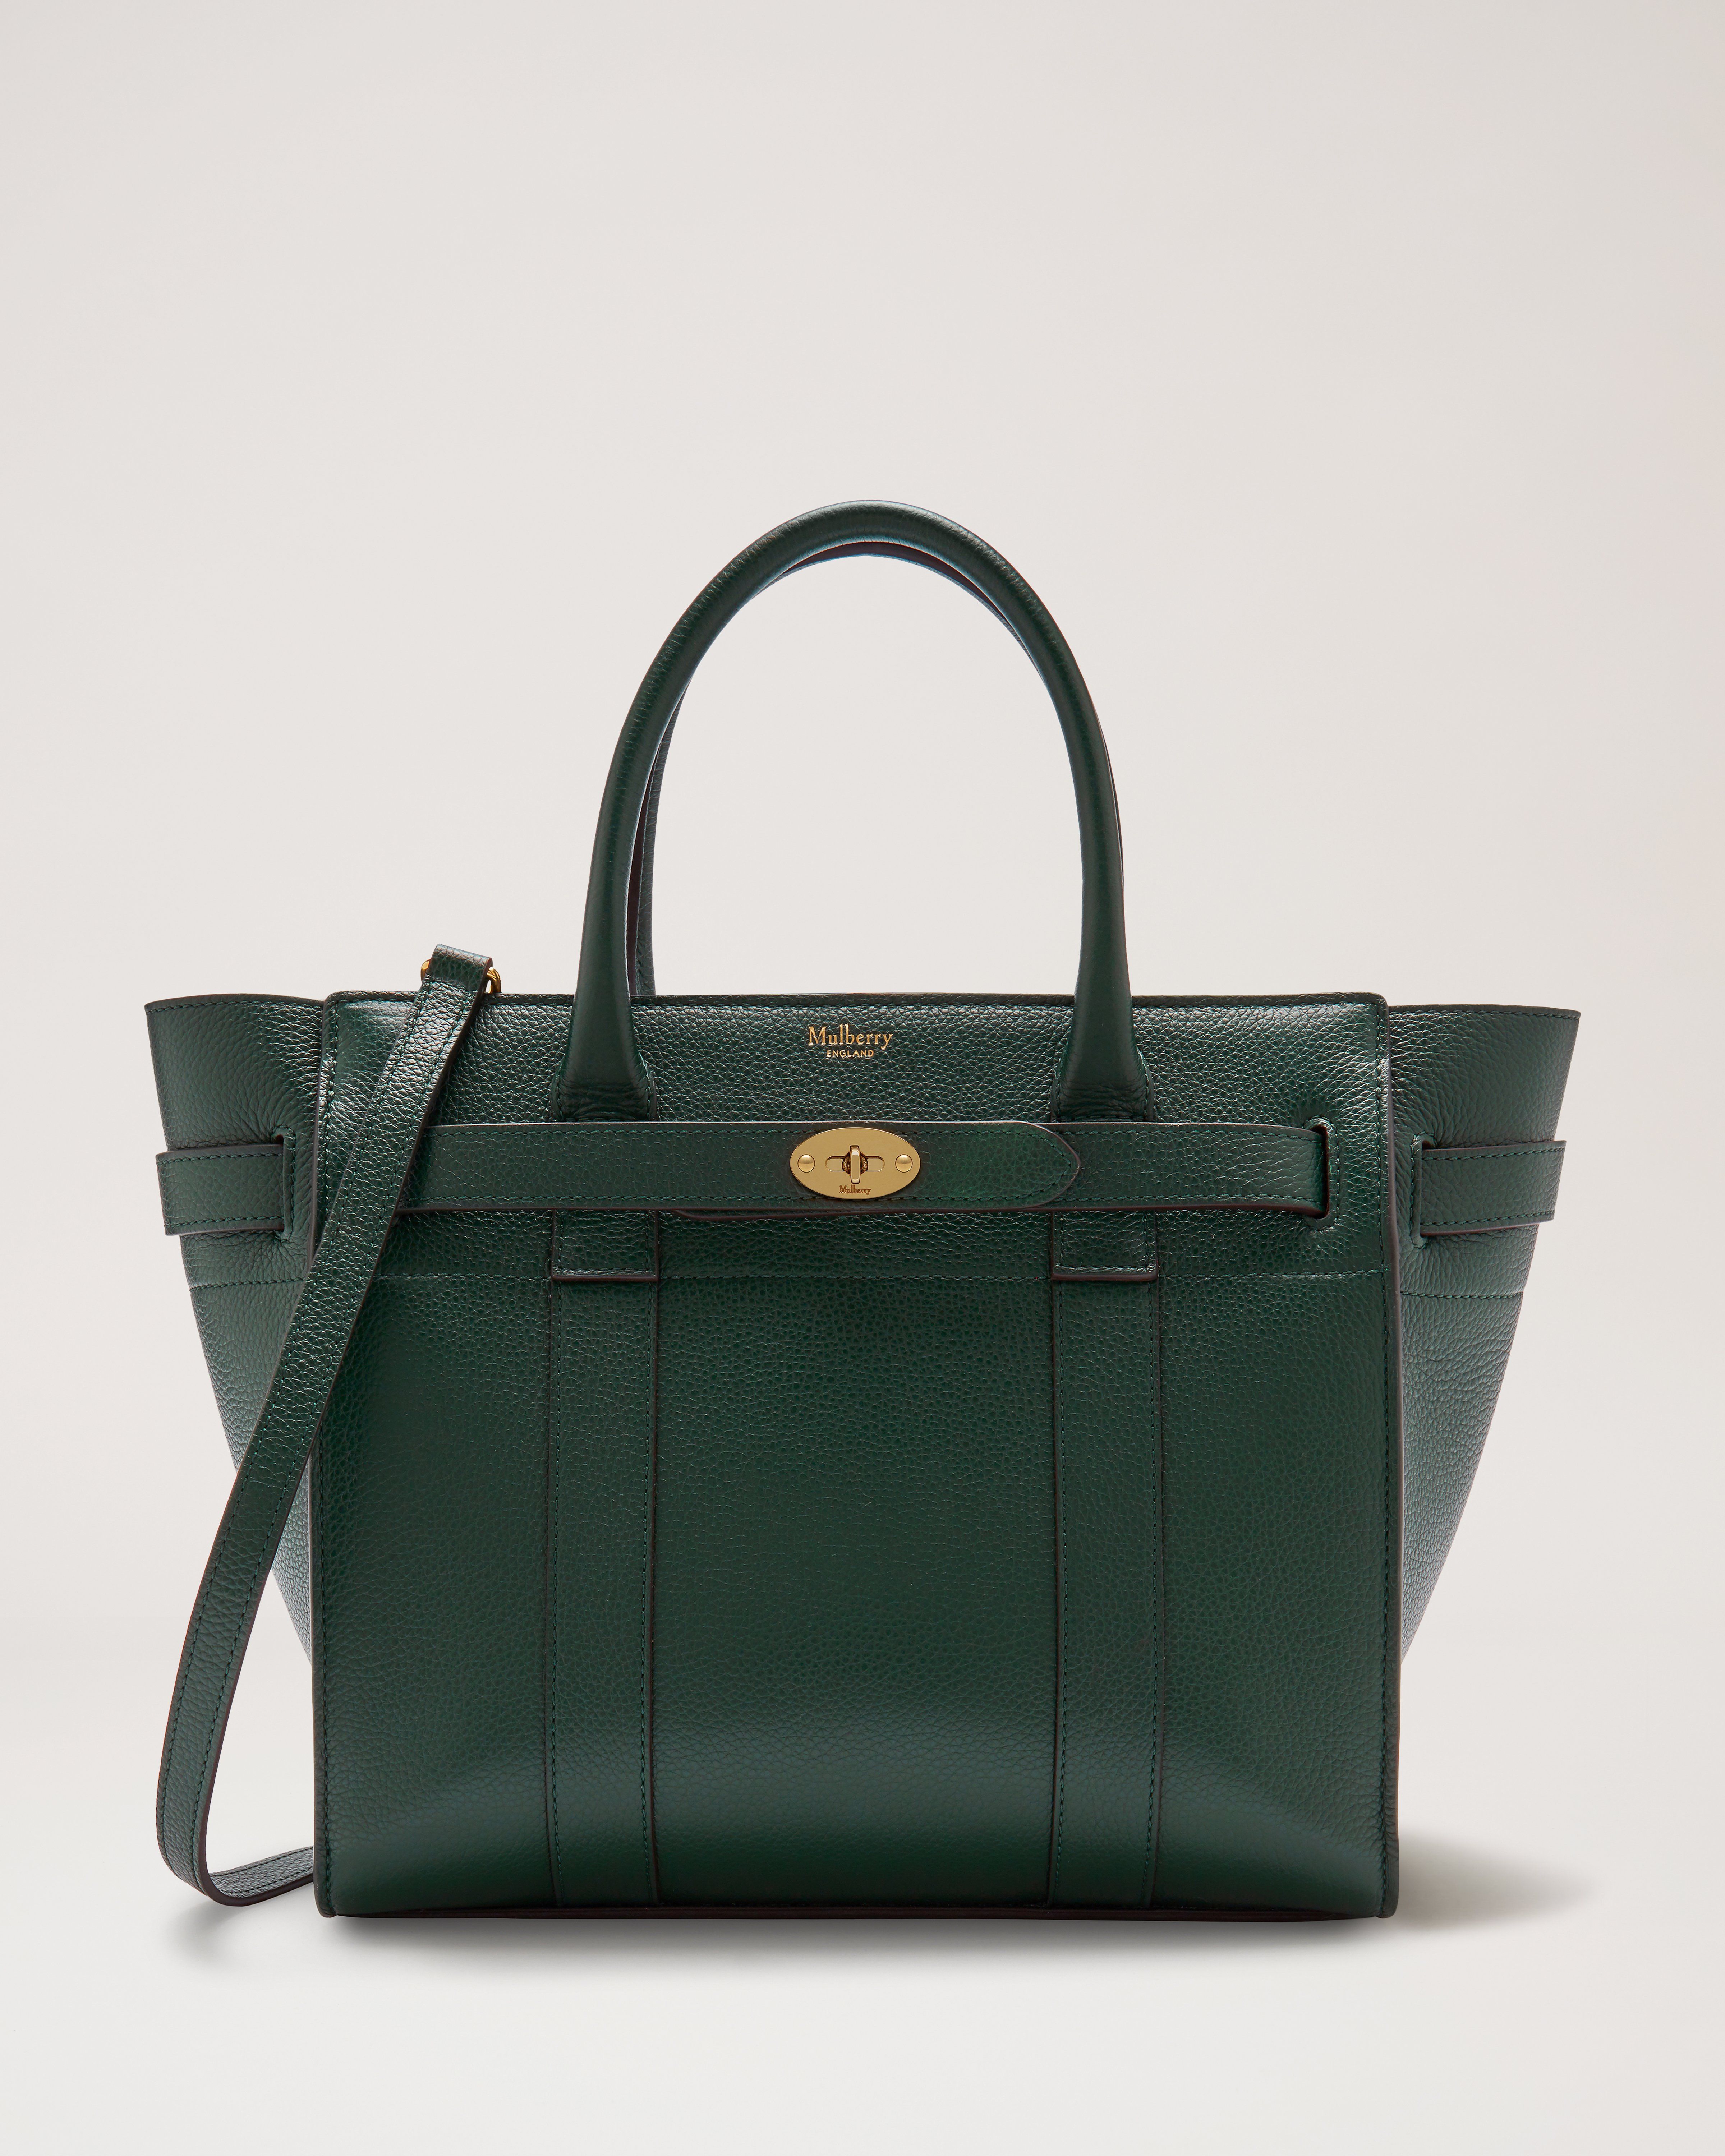 The Mulberry Exchange, Mulberry Green, Mulberry